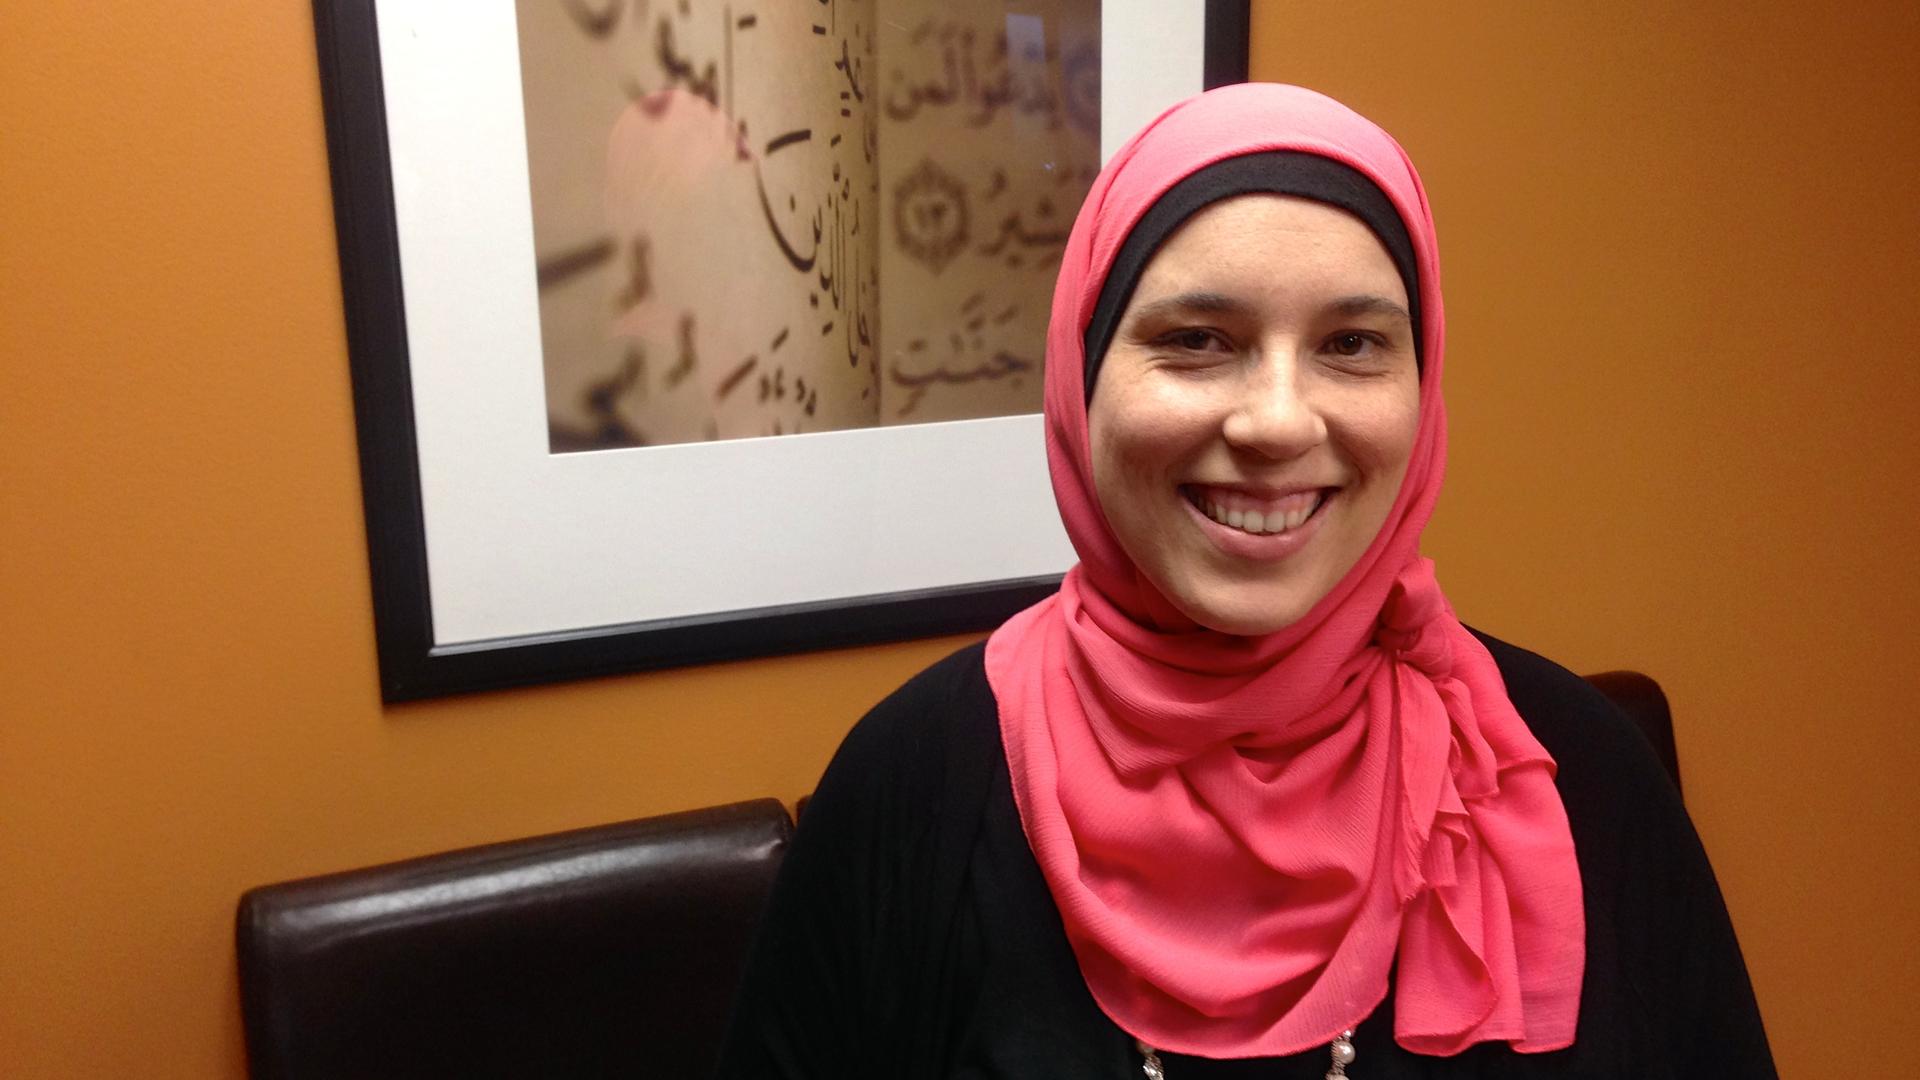 When Alia Salem made the difficult decision to seek a divorce, she says she got help from her imam.